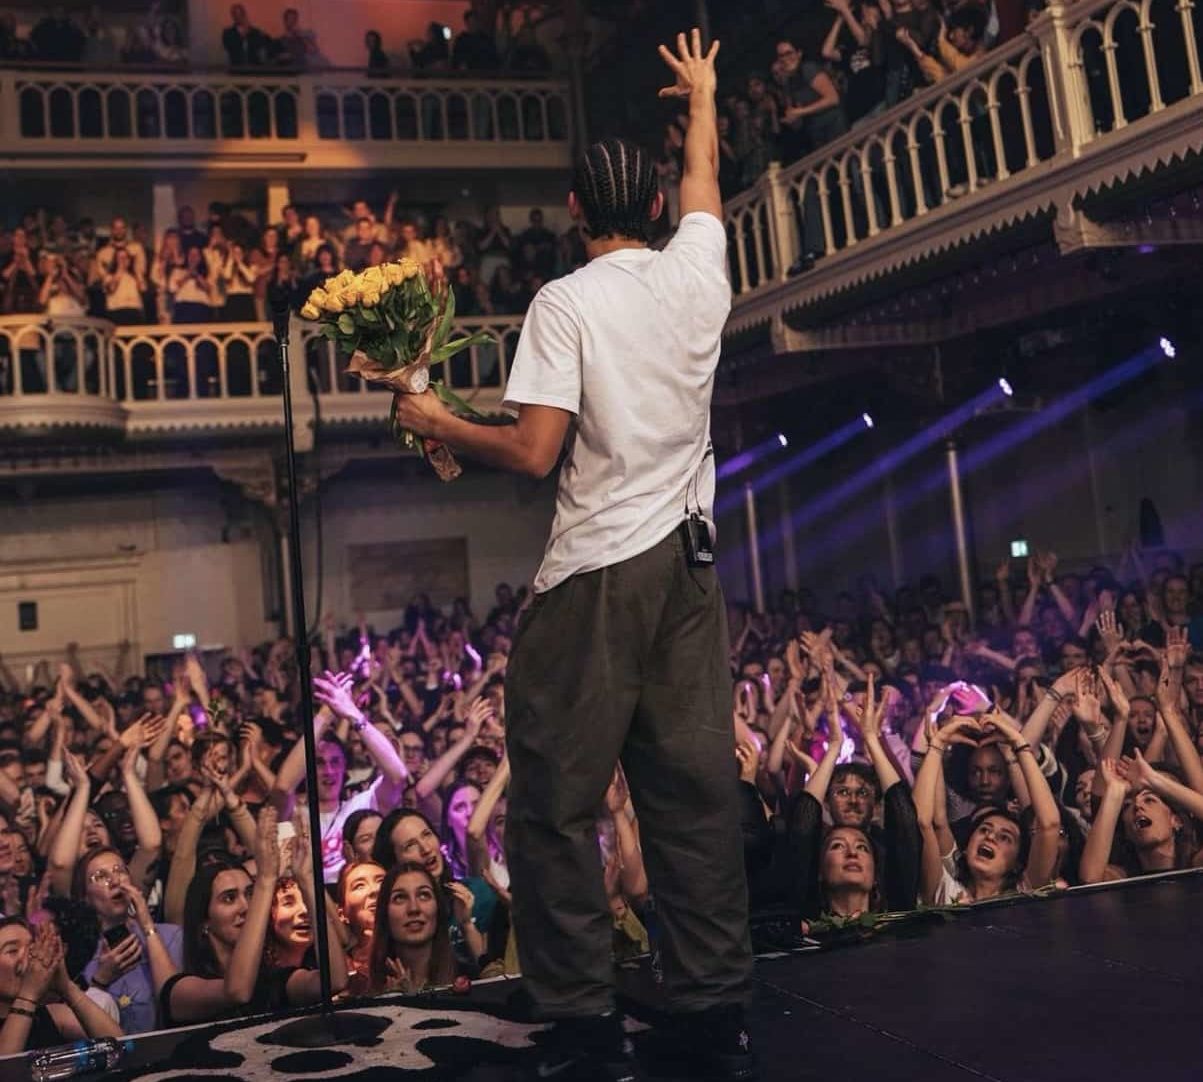 gigs and tours loyle carner